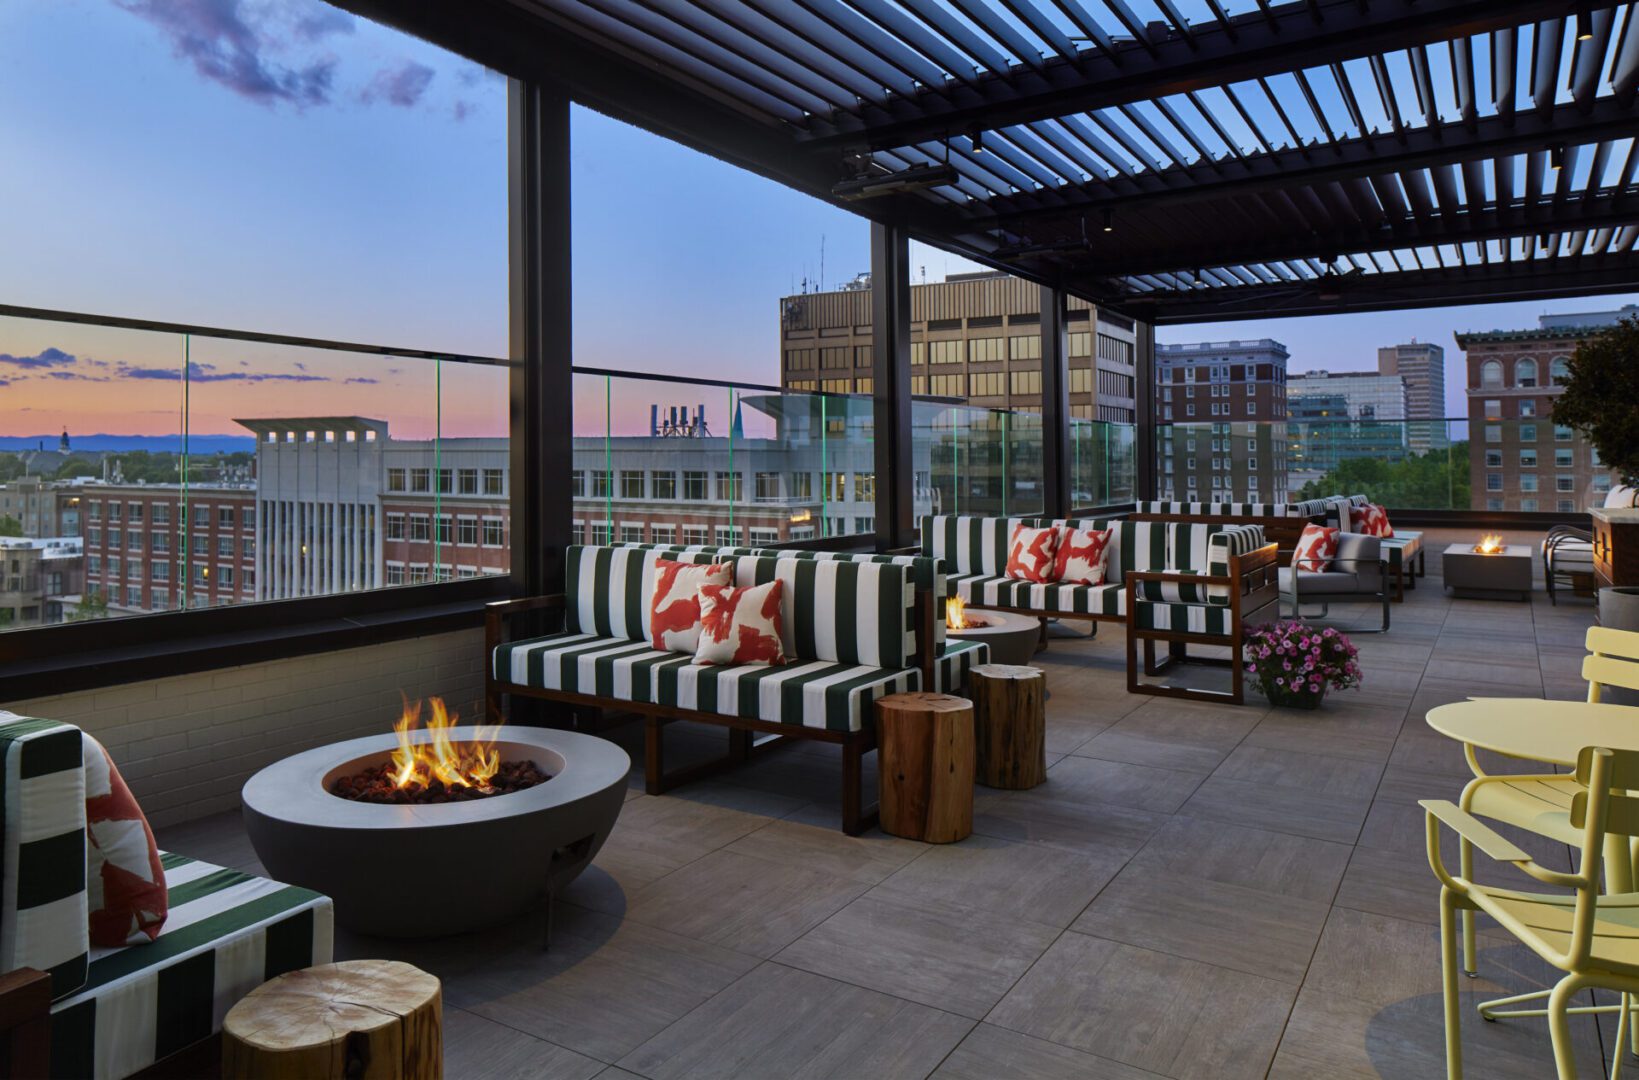 AC Hotel Greenville, Hospitality Architecture